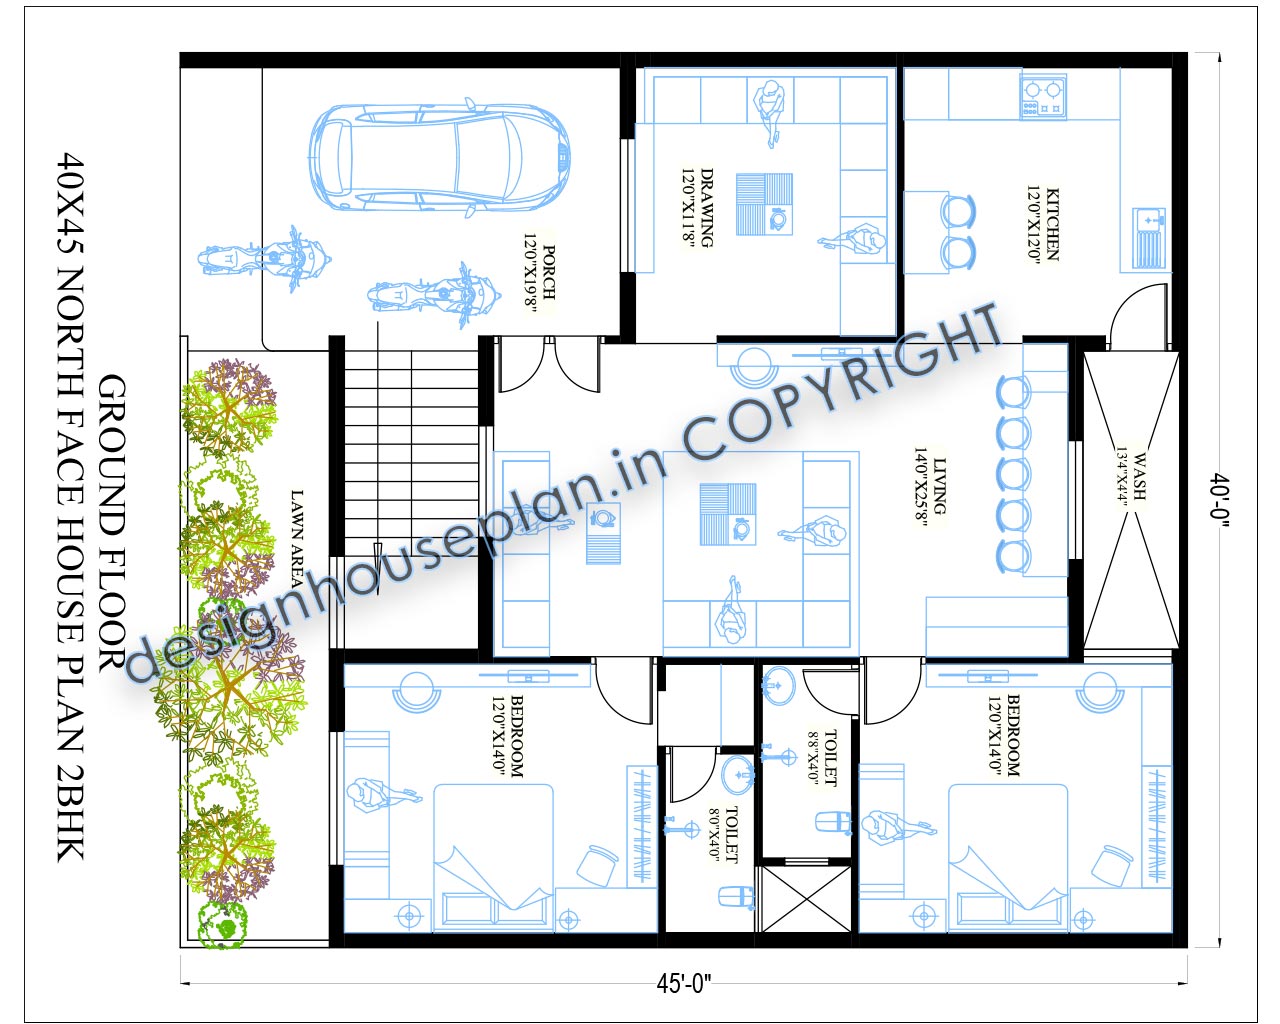 This is a 40 by 45 House Plans With Parking Indian Style with 2 bedrooms and a lawn area.